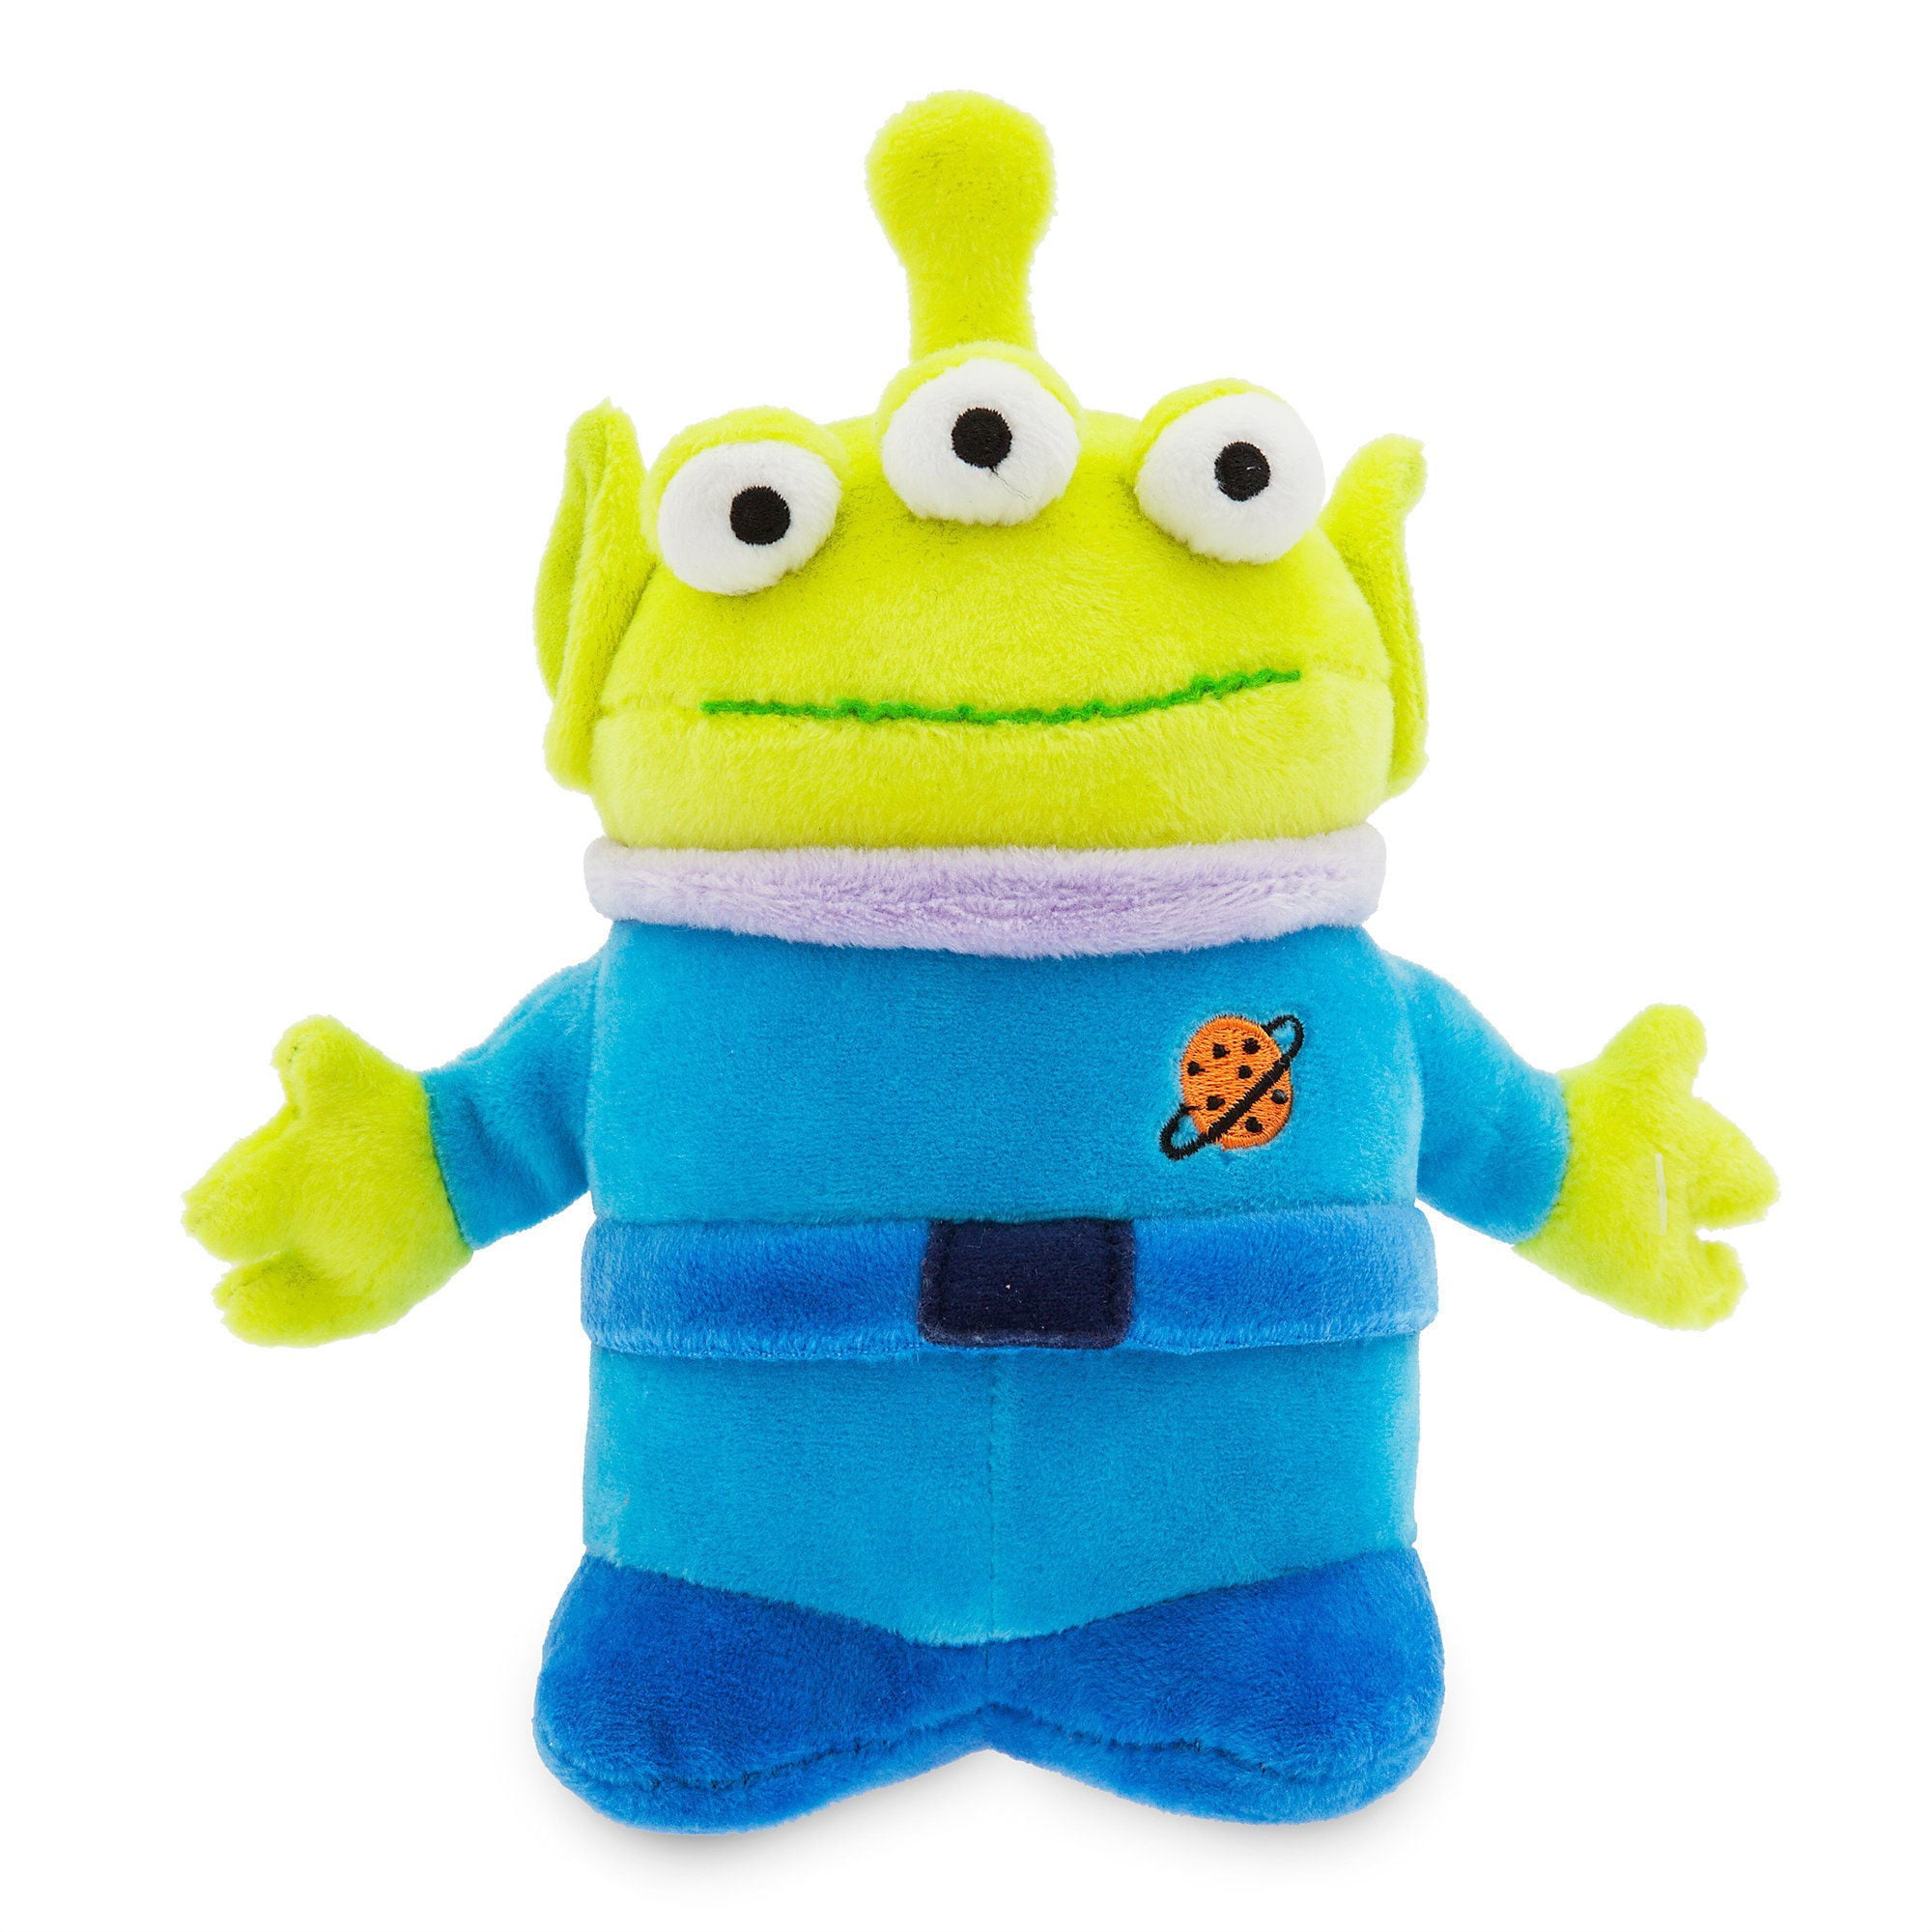 Official Disney Store Toy Story Alien Bean Bag Soft Plush Toy 20cm Tall 